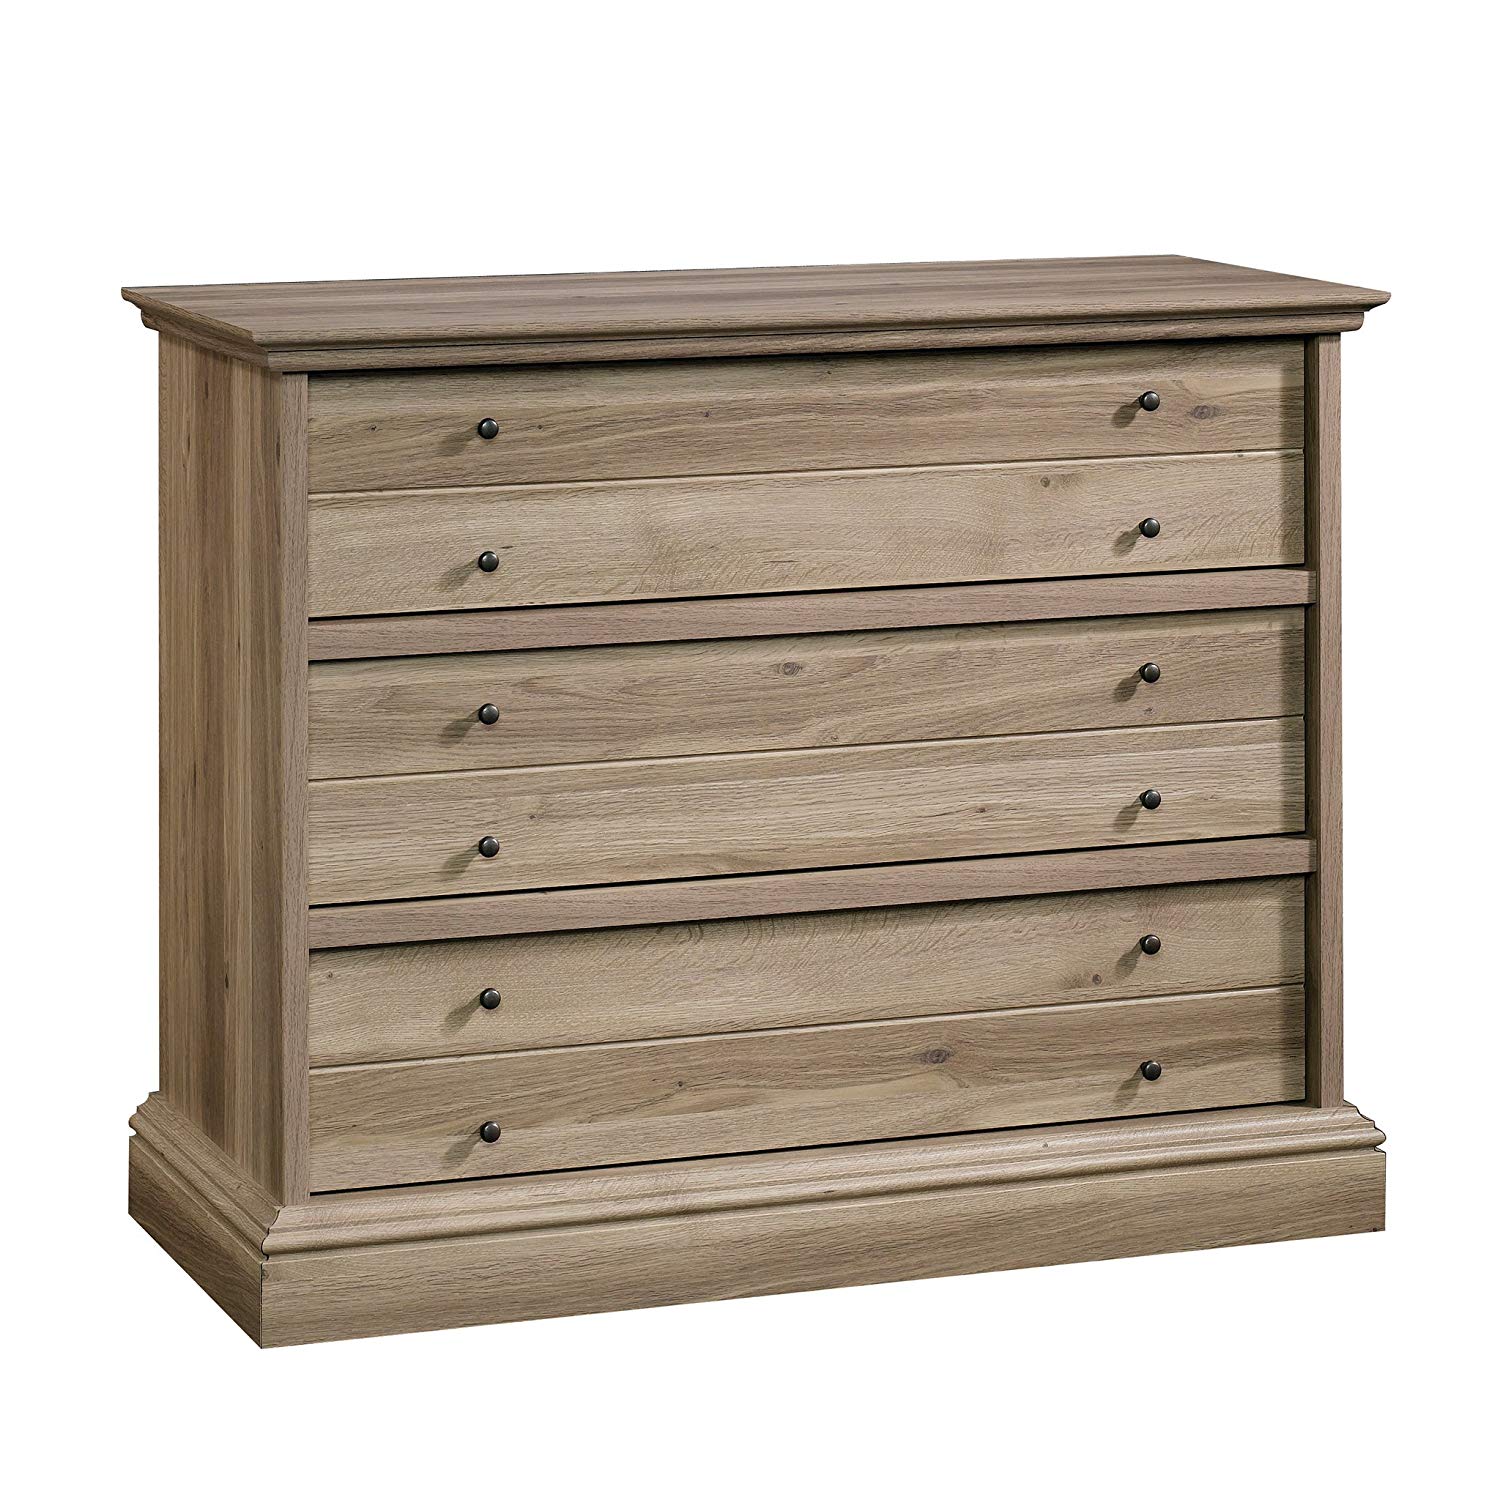 Sauder 418702 3 Bedroom Chest Of Drawers Review